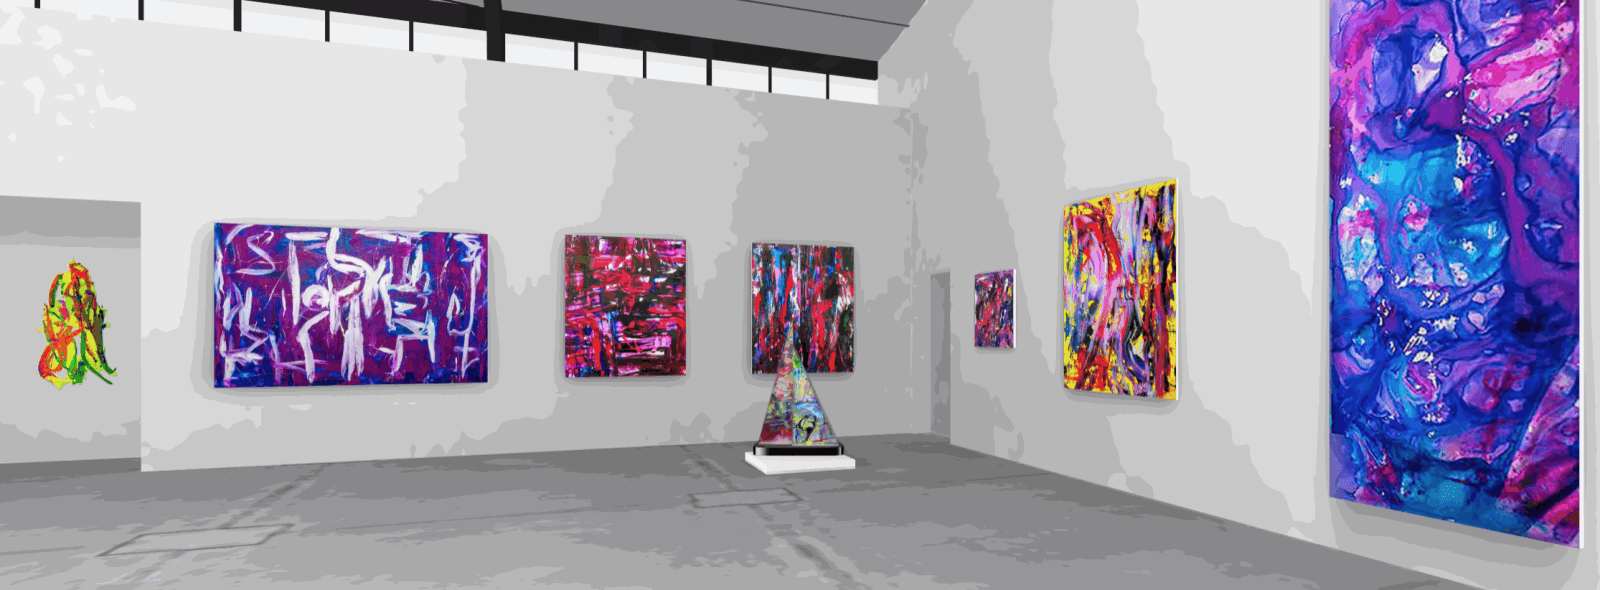 Dellamarie Parrilli: Up Close and Colorful Installation view